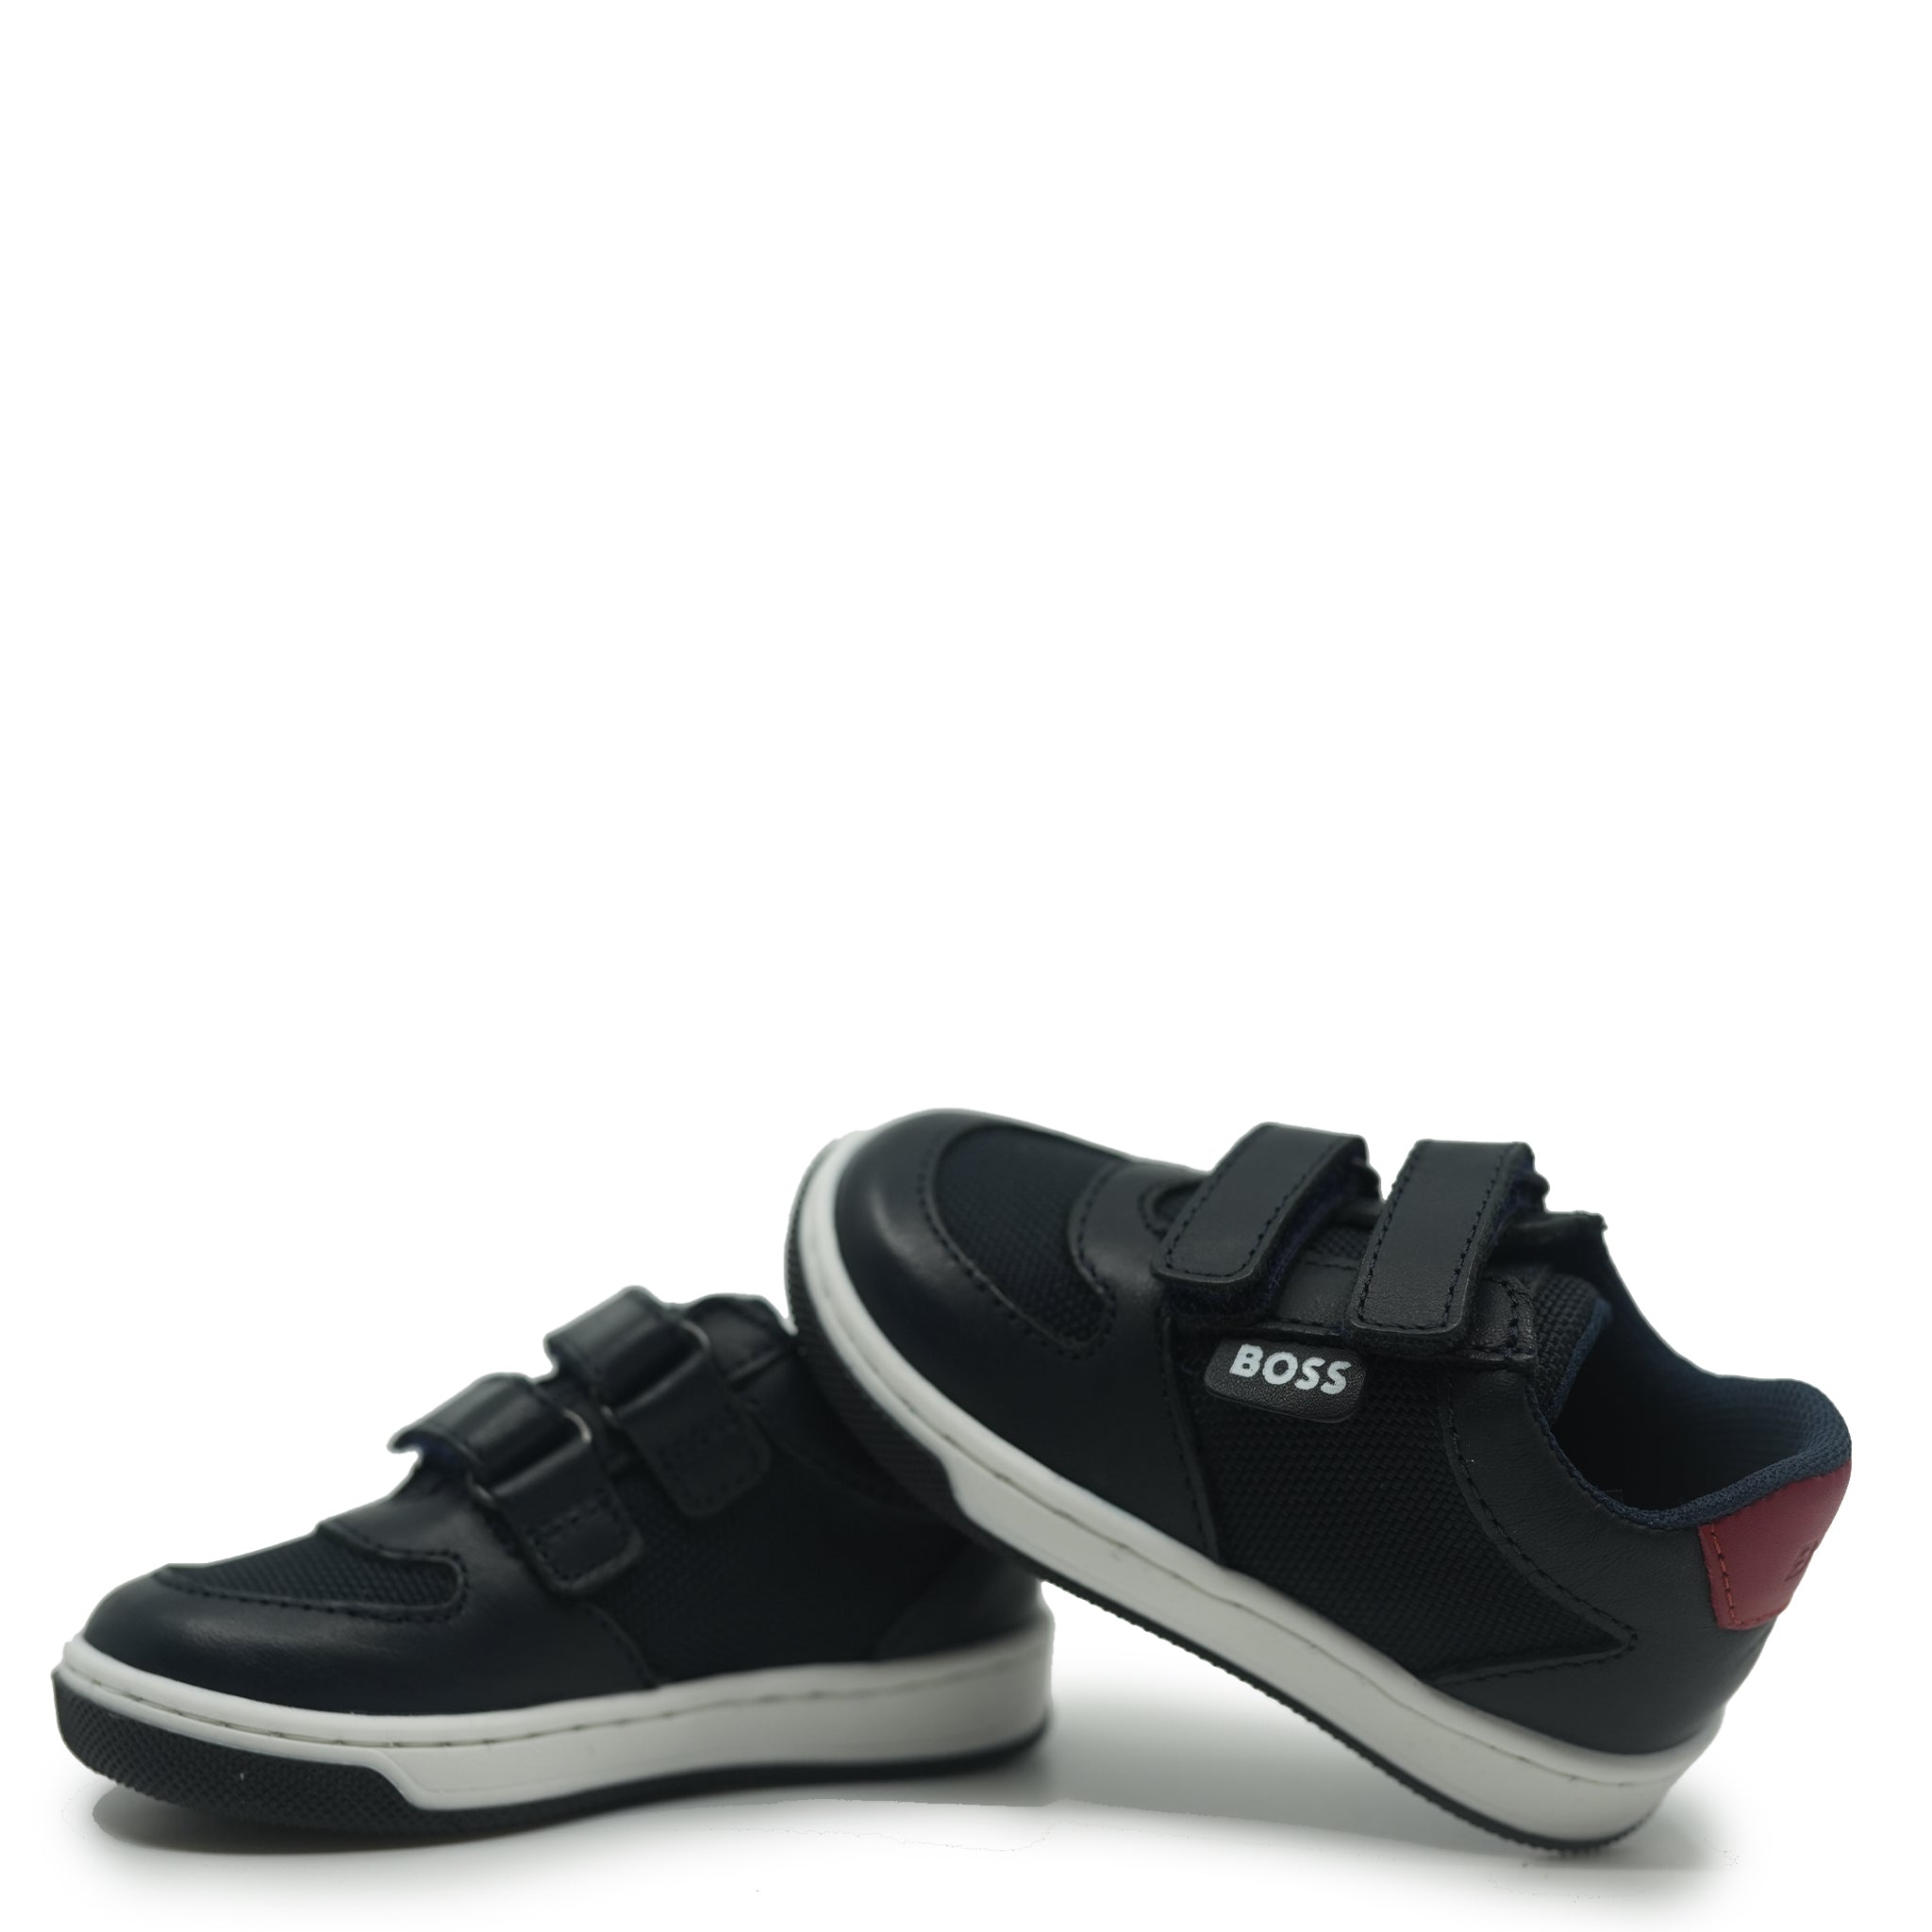 Buy Pine Kids Sneakers with Velco Closure Black & White for Girls  (7-8Years) Online, Shop at FirstCry.com - 14108060